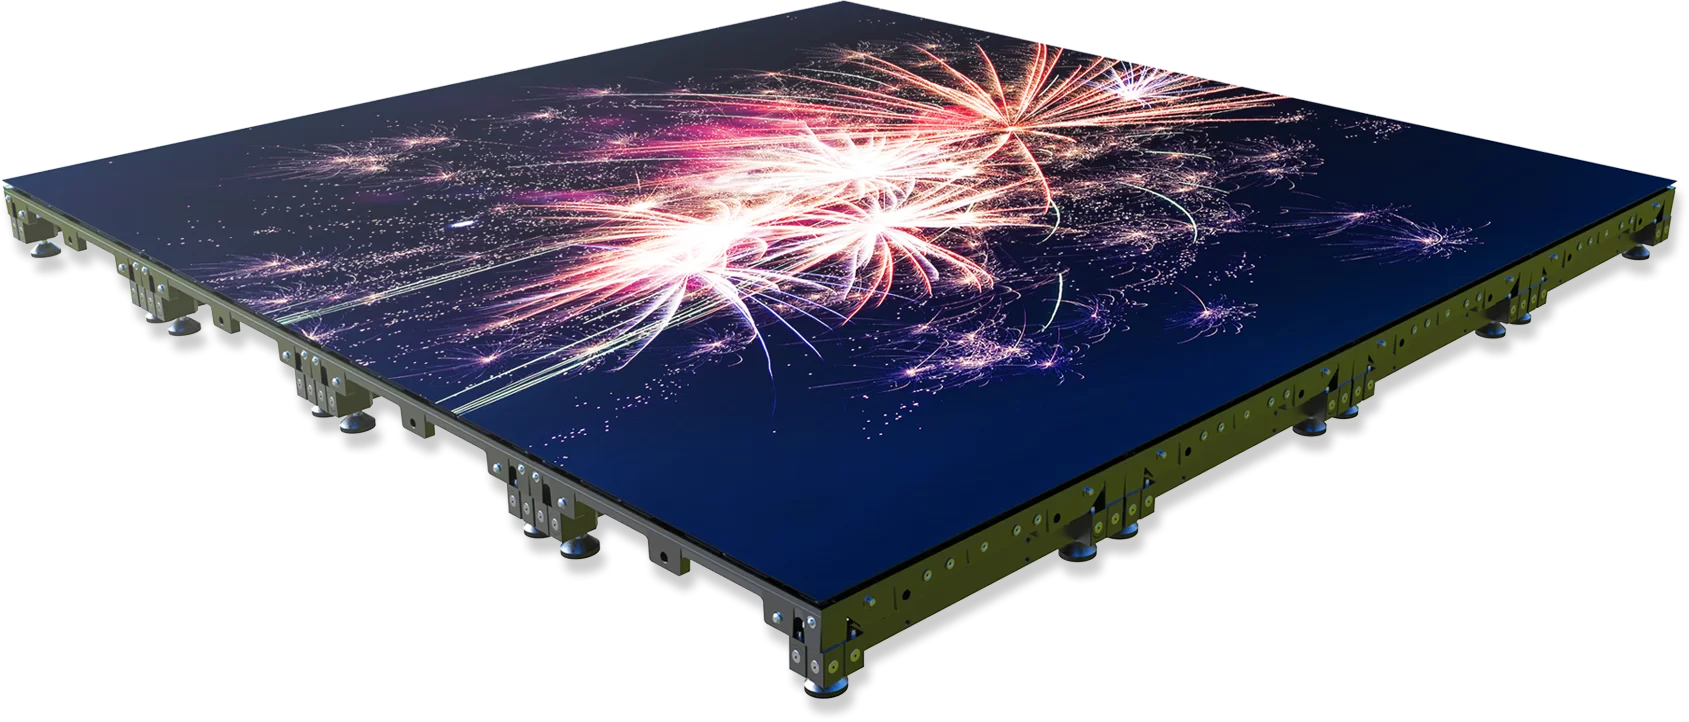 LED Video Floor from Dynamo Led Displays